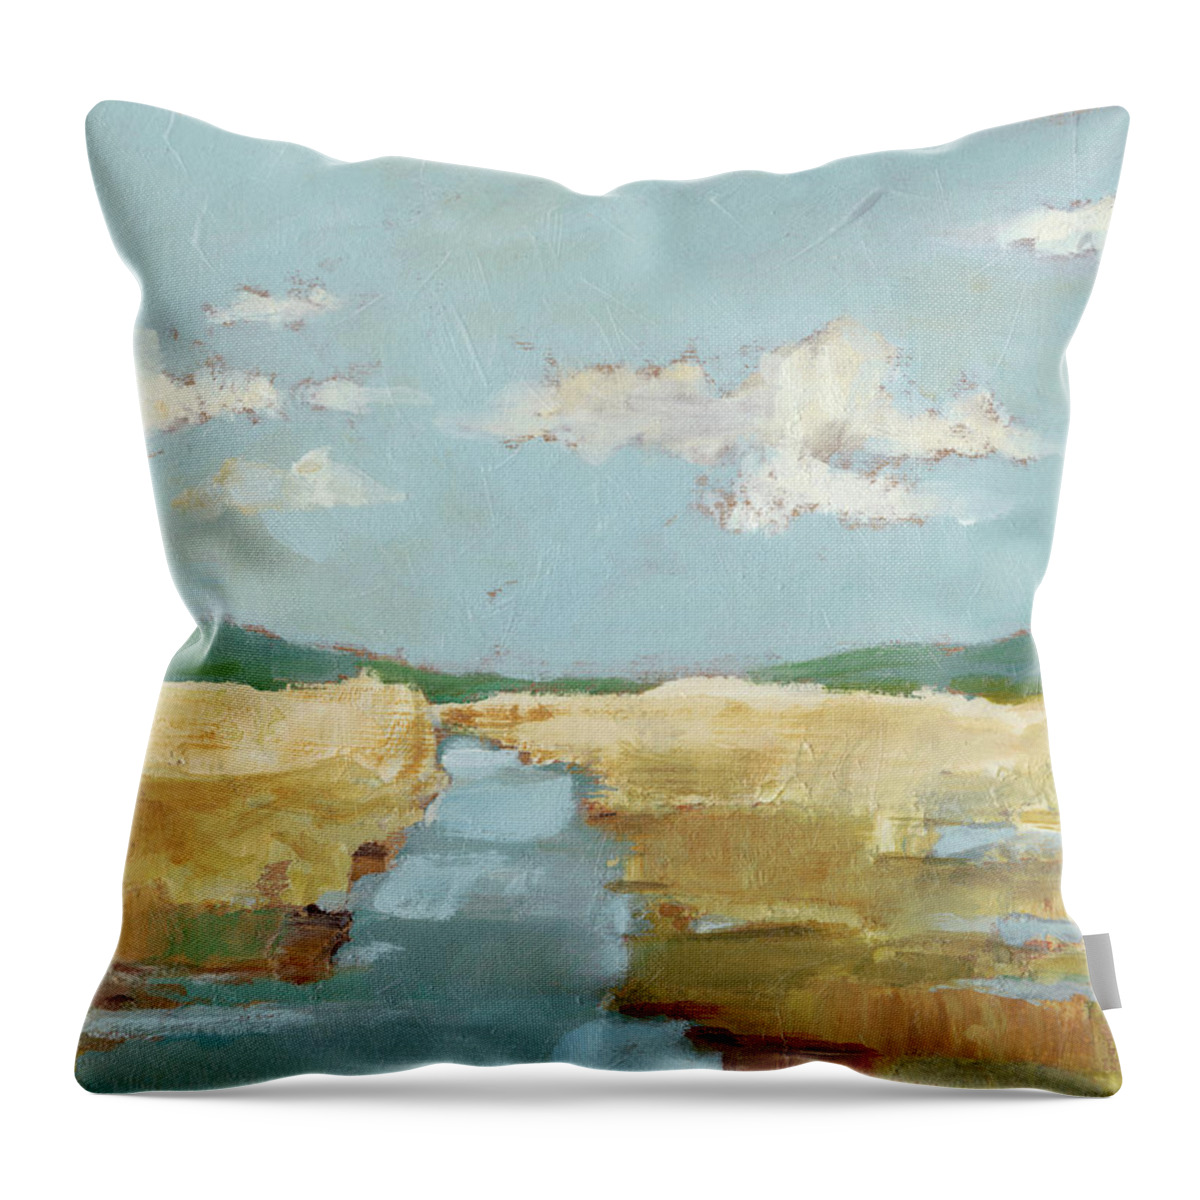 Landscapes Throw Pillow featuring the painting Summer Wetland II #1 by Ethan Harper